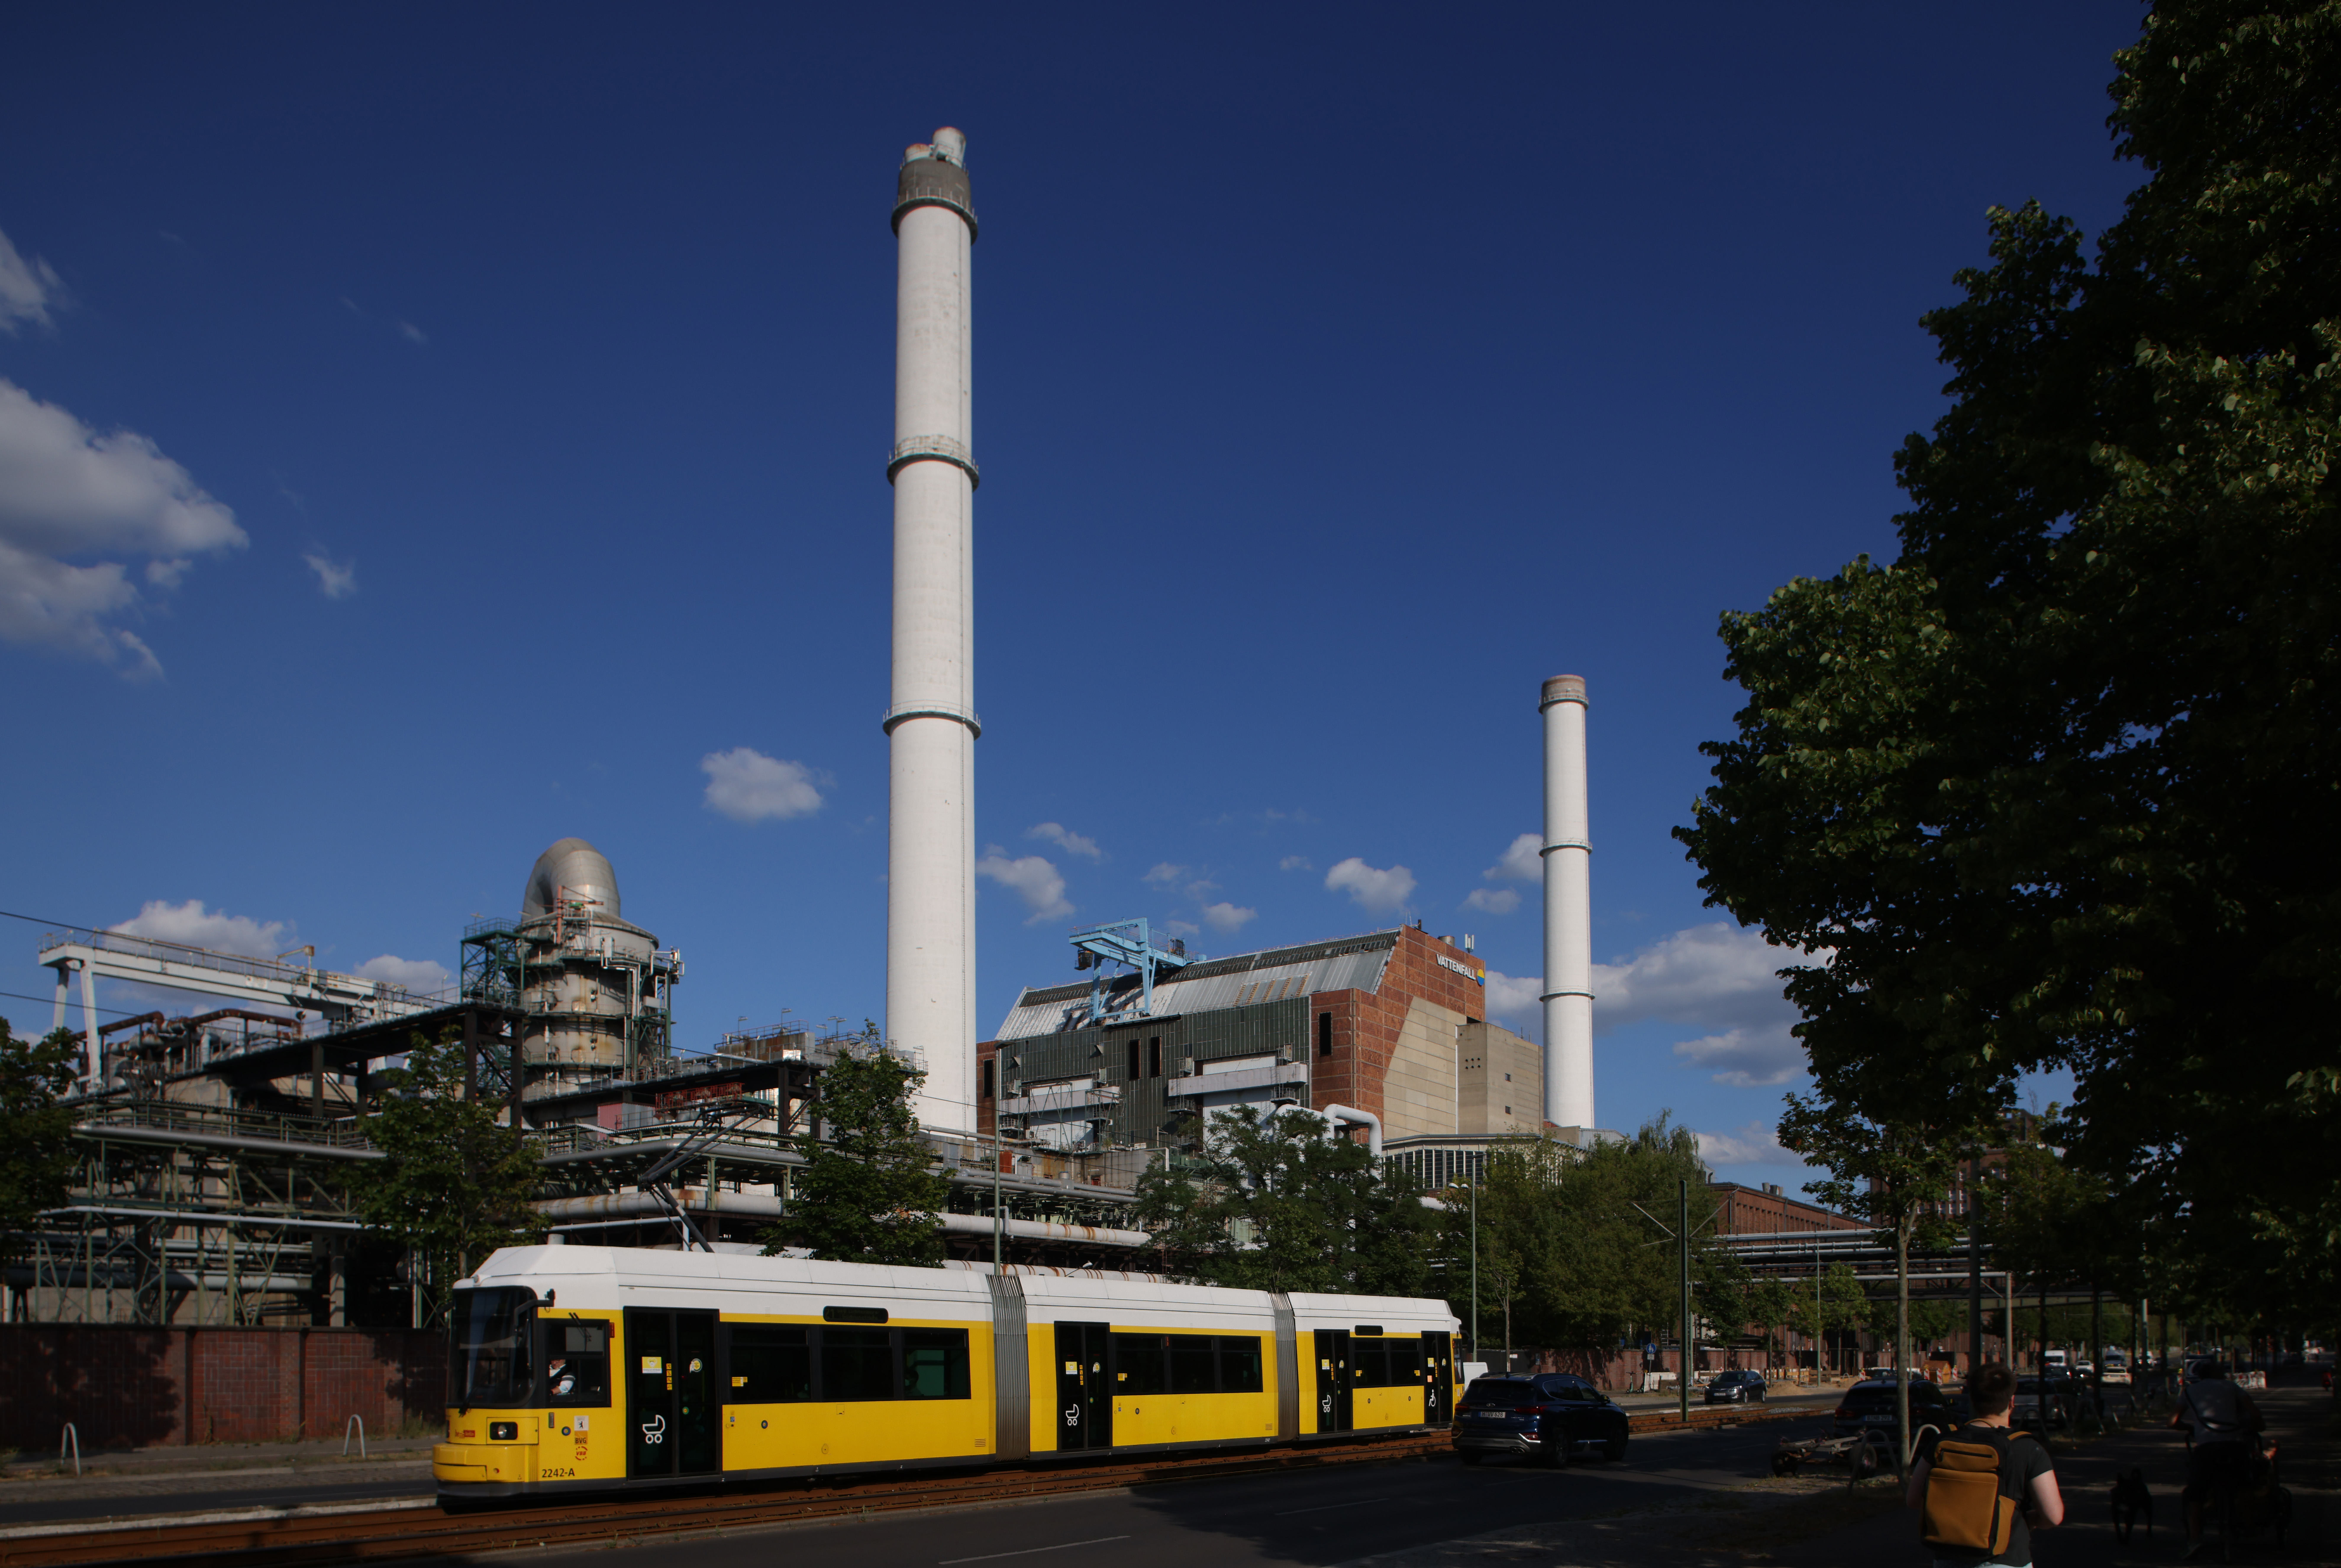 A city tram passes by the Klingenberg natural gas-powered thermal power station on July 04, 2022 in Berlin, Germany. Germany still receives a large portion of its natural gas from Russia. Russian authorities have recently reduced the flow of gas arriving through pipelines to Germany and other European countries significantly, prompting the German government to issue warnings of possible shortages, especially for this coming winter. Germany is seeking to ween itself off Russian energy imports in order to punish Russia for its ongoing war in Ukraine. The Klingenberg plant is operated by Swedish energy supplier Vattenfall. (Photo by Sean Gallup/Getty Images)